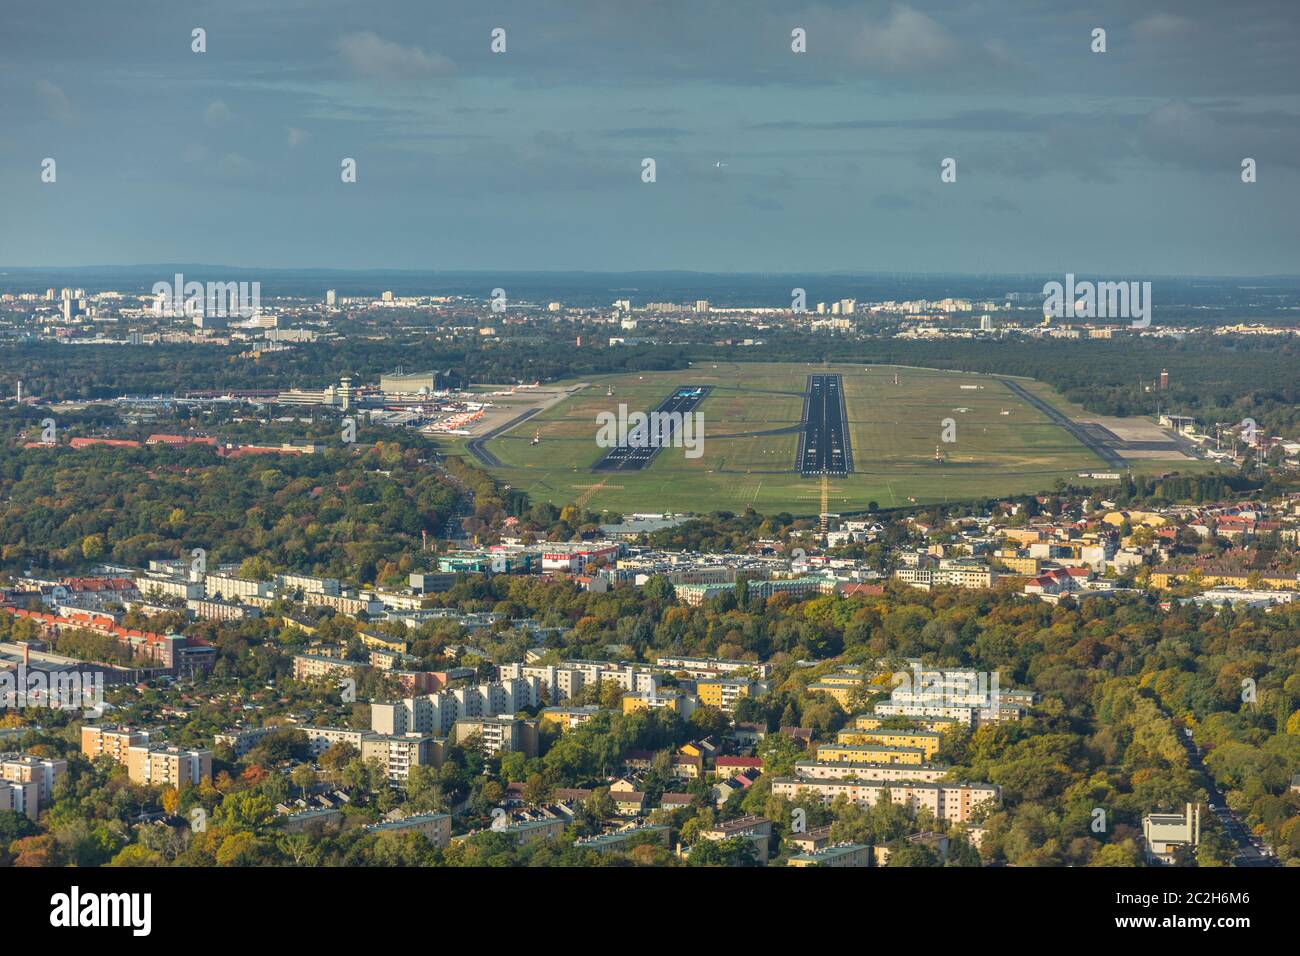 Berin, Germany,  Landscape around Berlin Tegel International Airport, Germany, Pilots view during approach into runway 26R  Tegel Airport - EDDT, TXL - aerial view Stock Photo